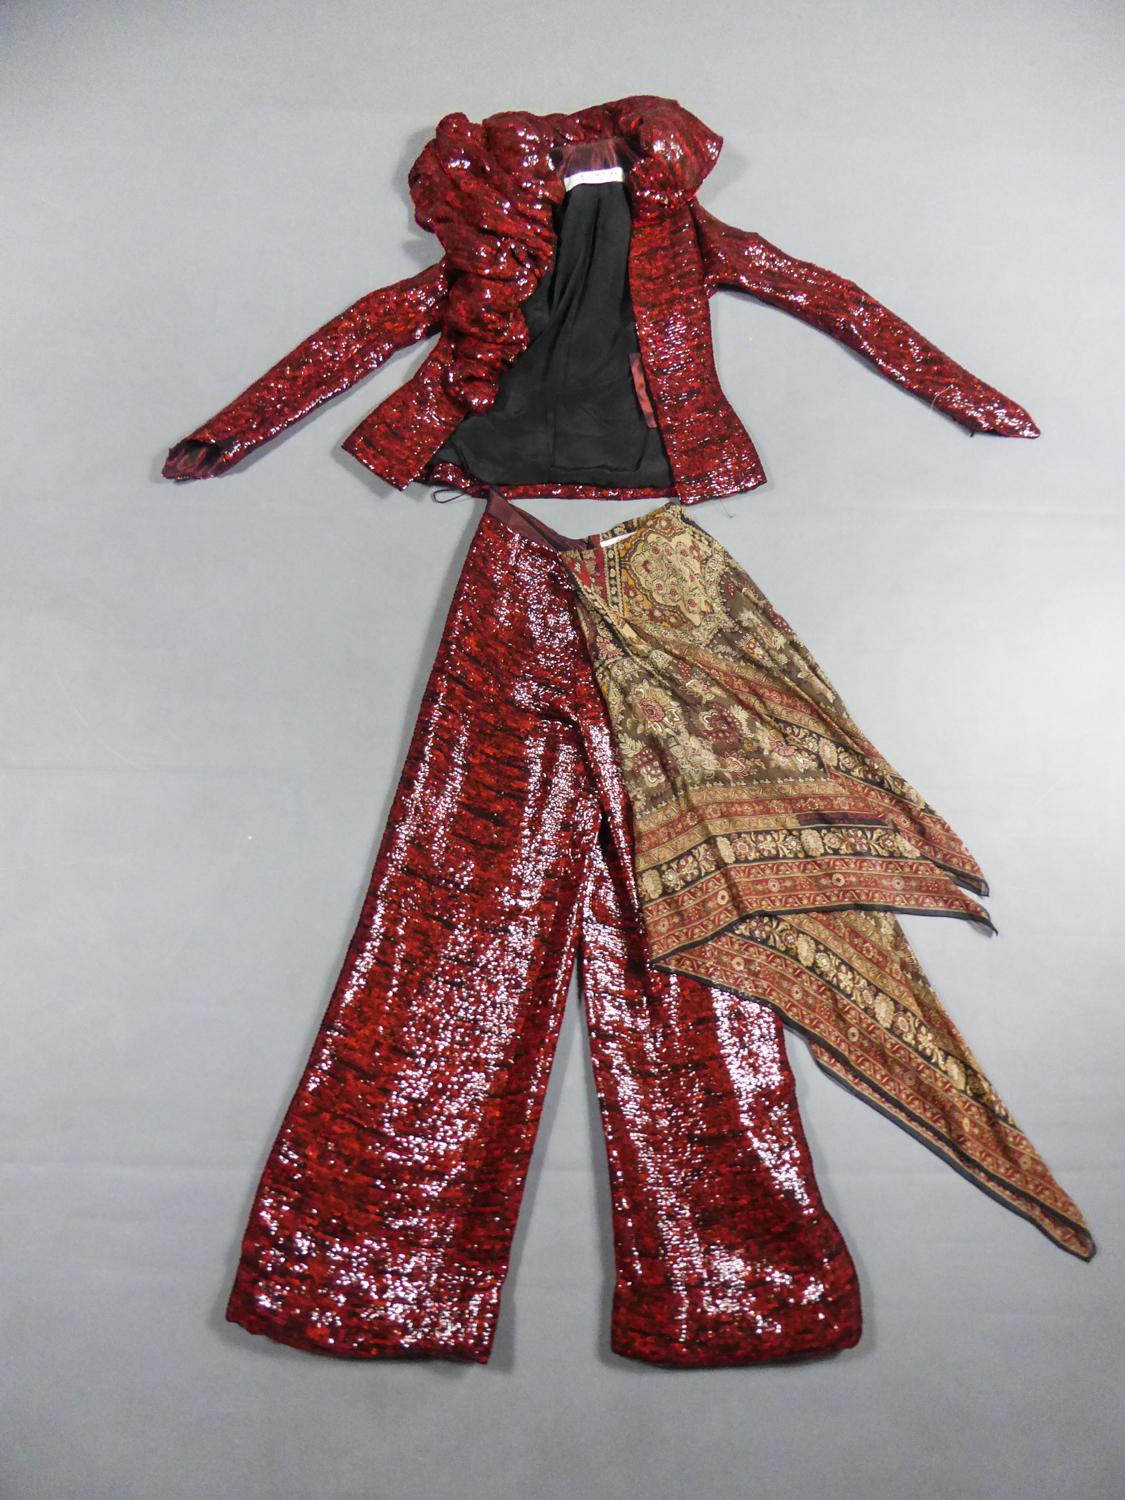 Fall Winter Collection 2001-2002
France

Jacket and pants set for Haute Couture Fashion Show - Look n ° 13 by Jean-Louis Scherrer - Stéphane Rolland, Fall Winter Collection 2001-2002. Astonishing marriage of red and black sequin embroidery and silk